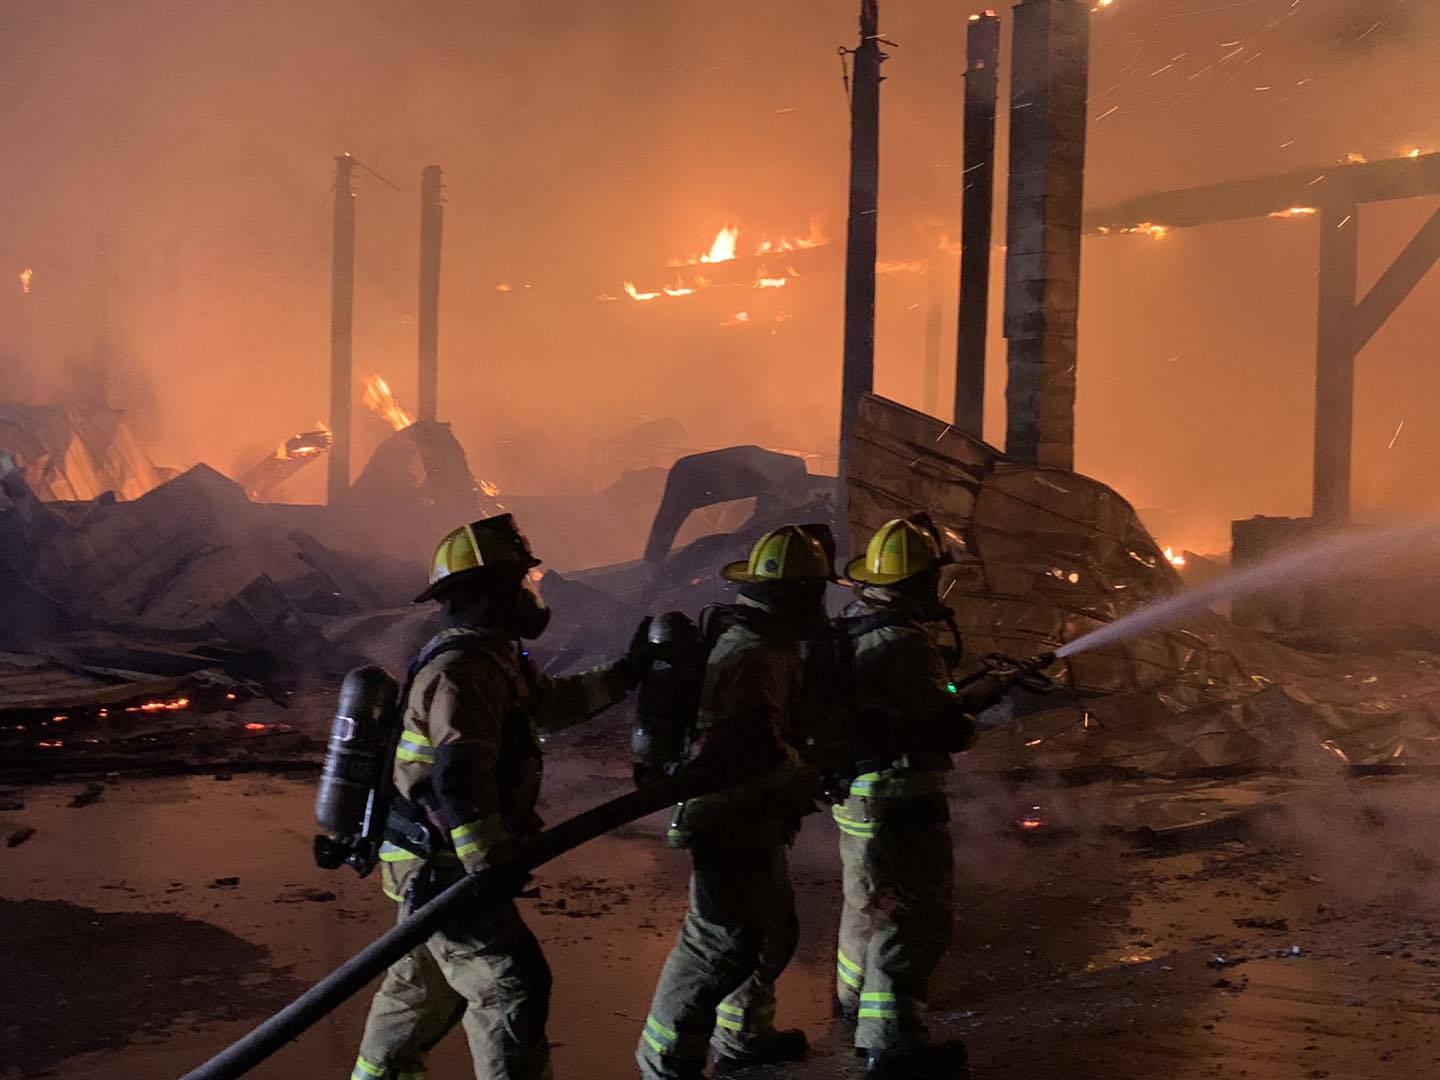 Fire rescue works the Hernando County Recycling Center Blaze on April 8, 2023. Photo Courtesy of the Hernando County Fire Rescue